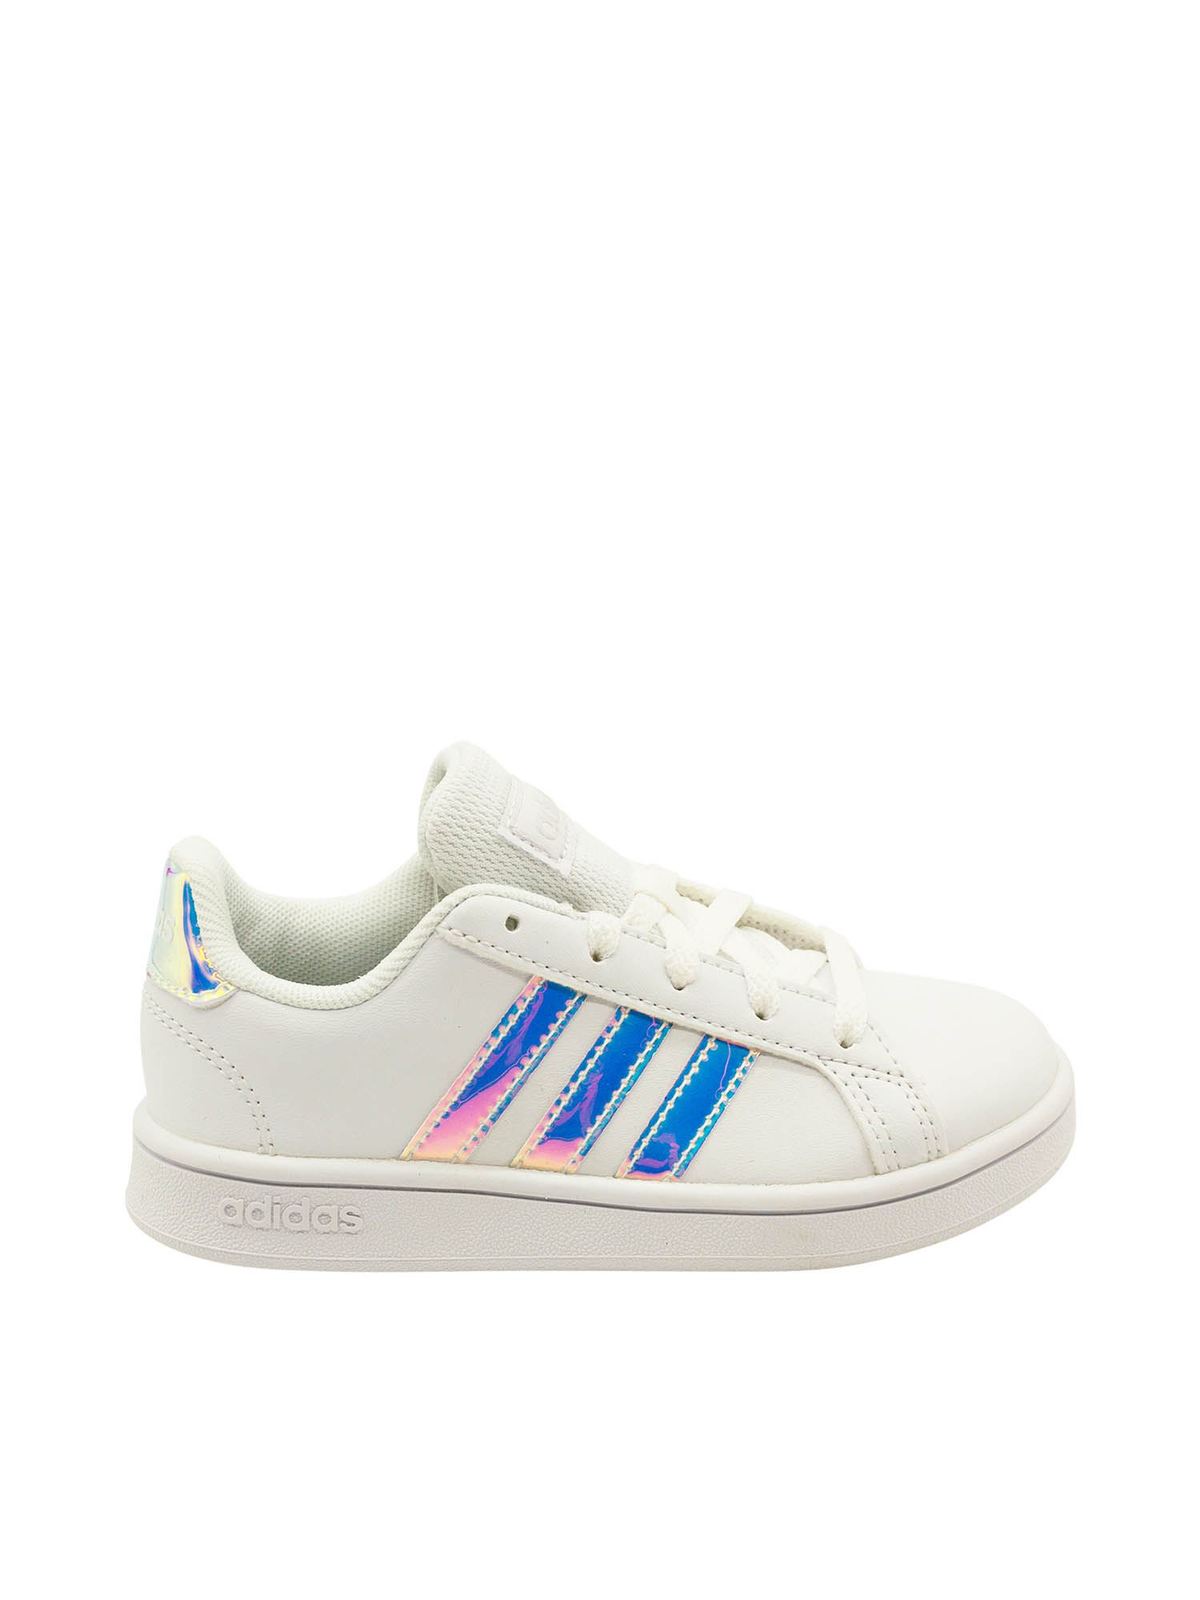 Trainers Adidas Originals Grand Court sneakers in white FW1274